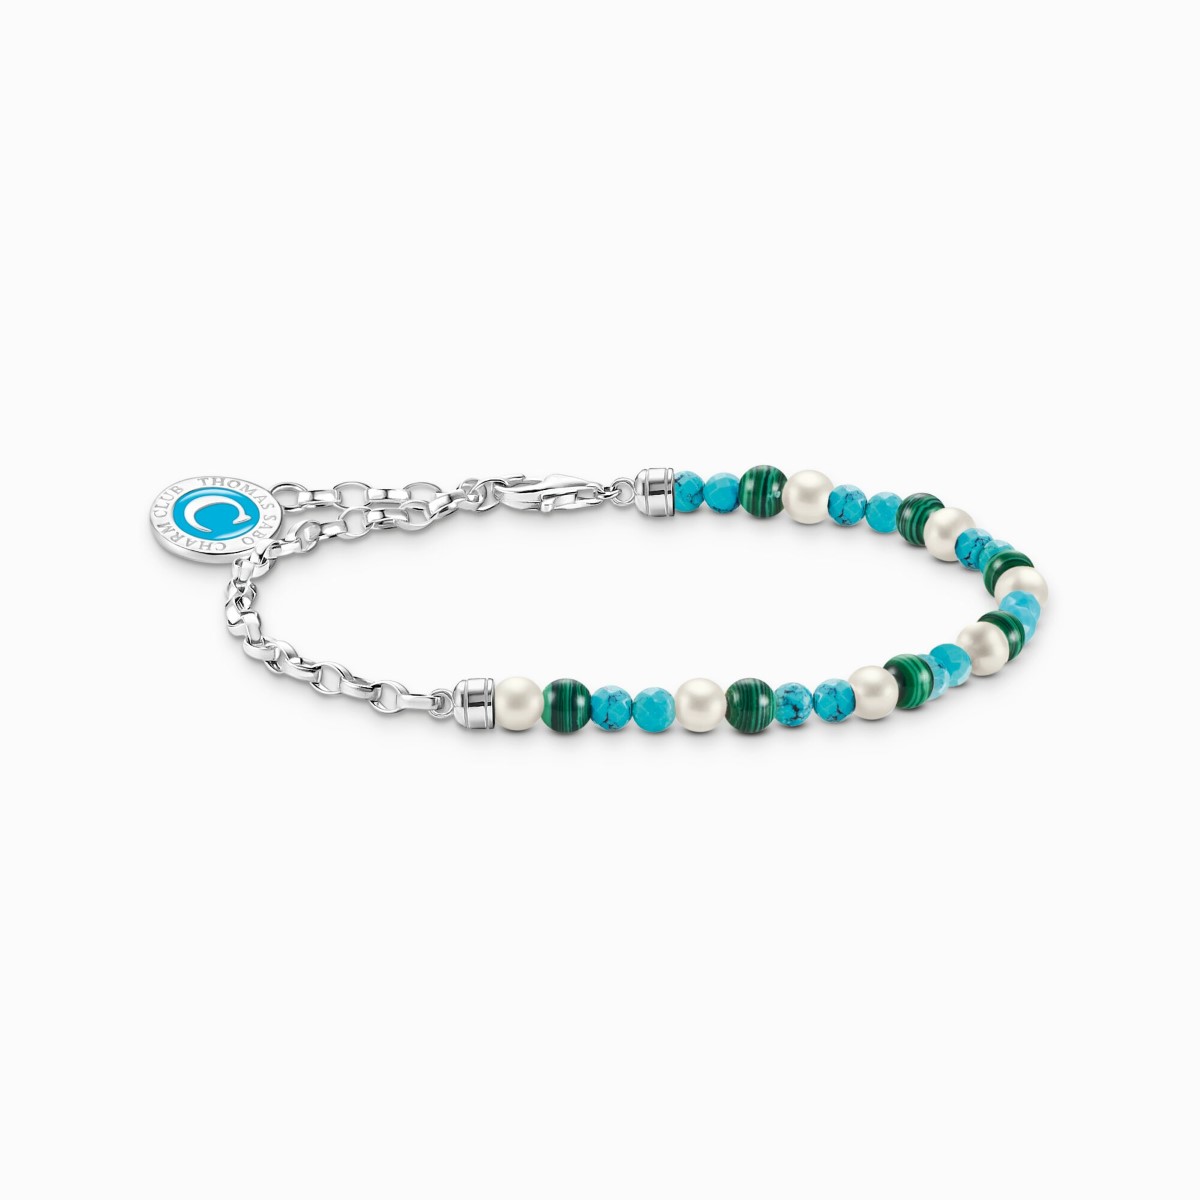 Thomas Sabo Member Charm Bracelet - Pearls with Malachite and Turquoise